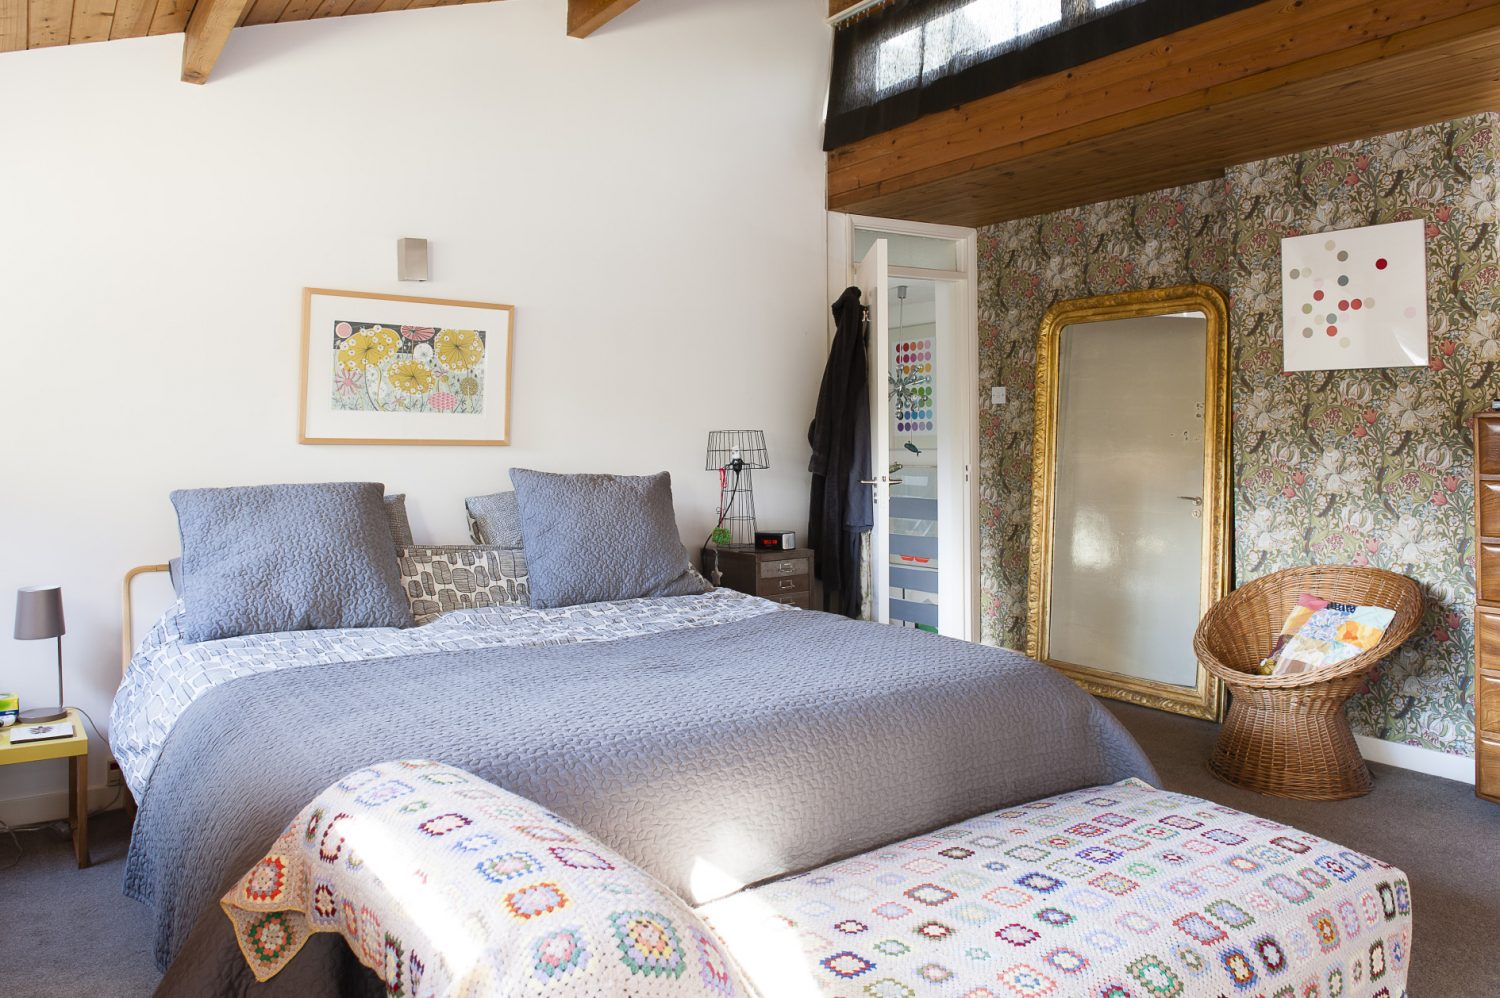 The master bedroom was once virtually all pine, three walls and soaring pitched ceiling. Sam covered one wall in a William Morris print, leaving the ceiling bare